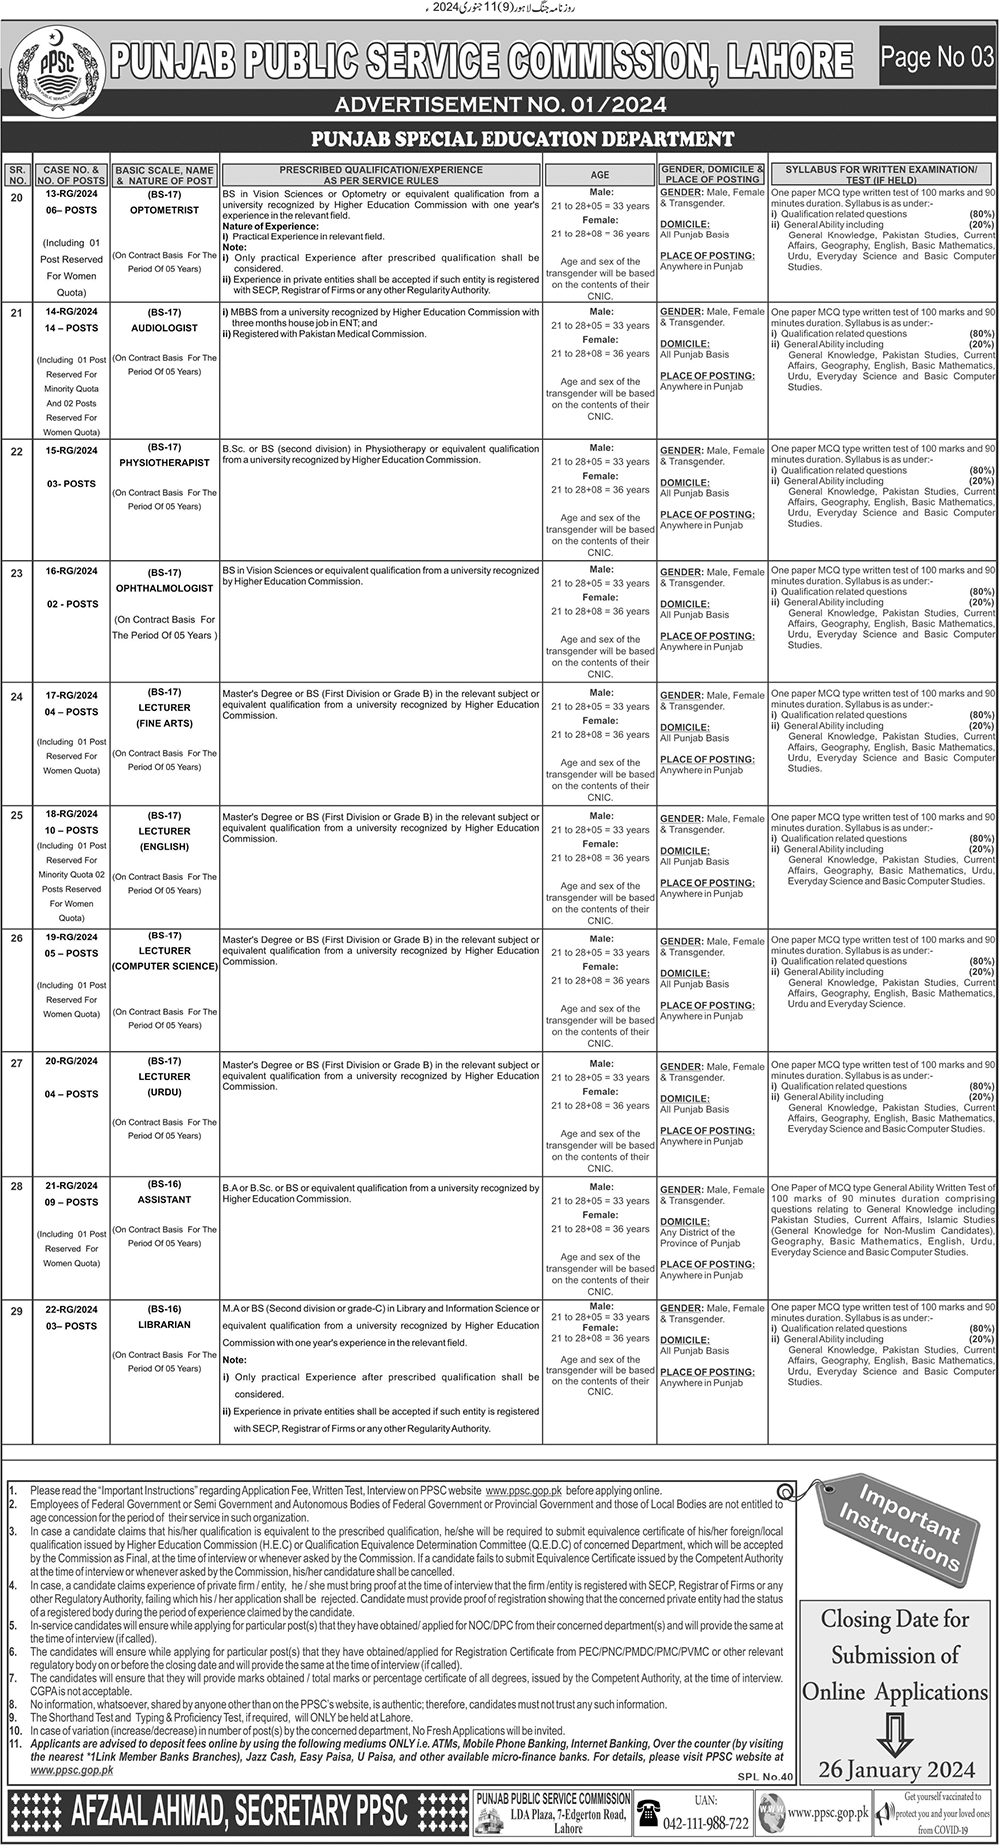 PPSC Jobs Ad No. 01 for 2024